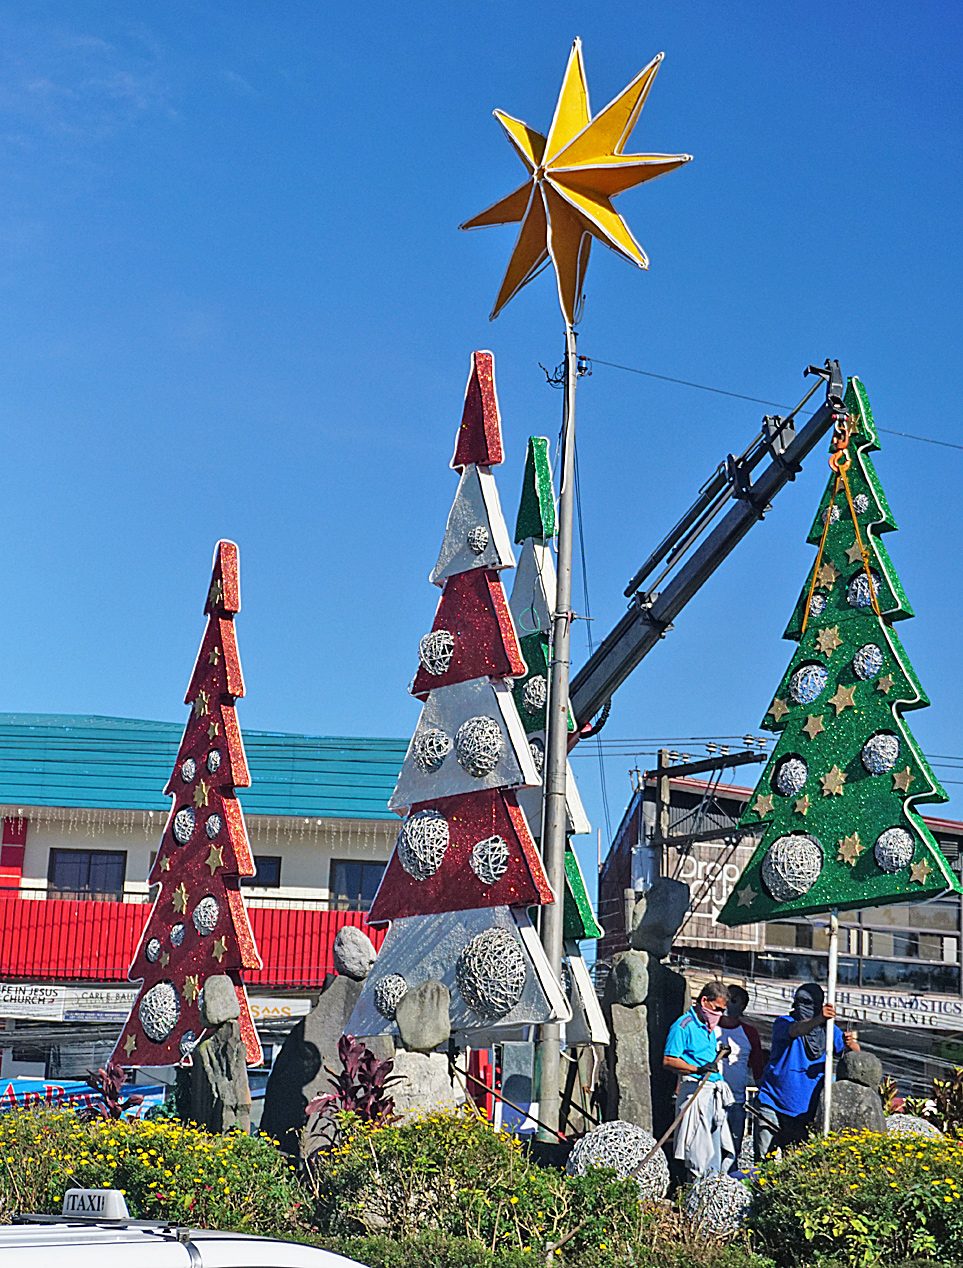 'FRESHER AIR'. Most locals liken the Christmas trees to the iconic Royal Pine car freshener. Photo by Mau Victa/Rappler  